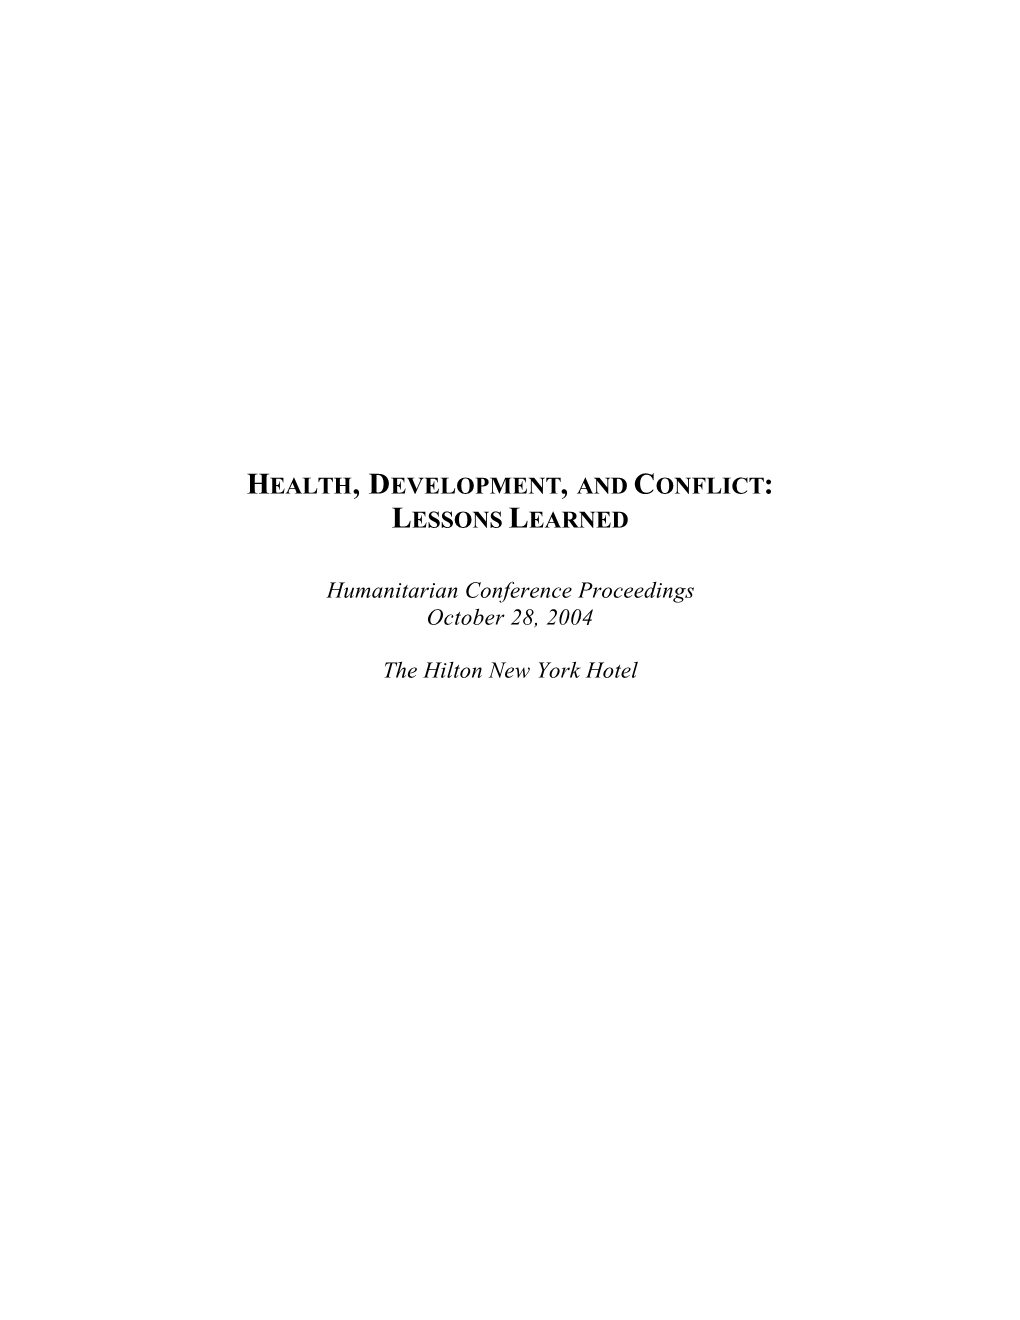 Health, Development, and Conflict: Lessons Learned